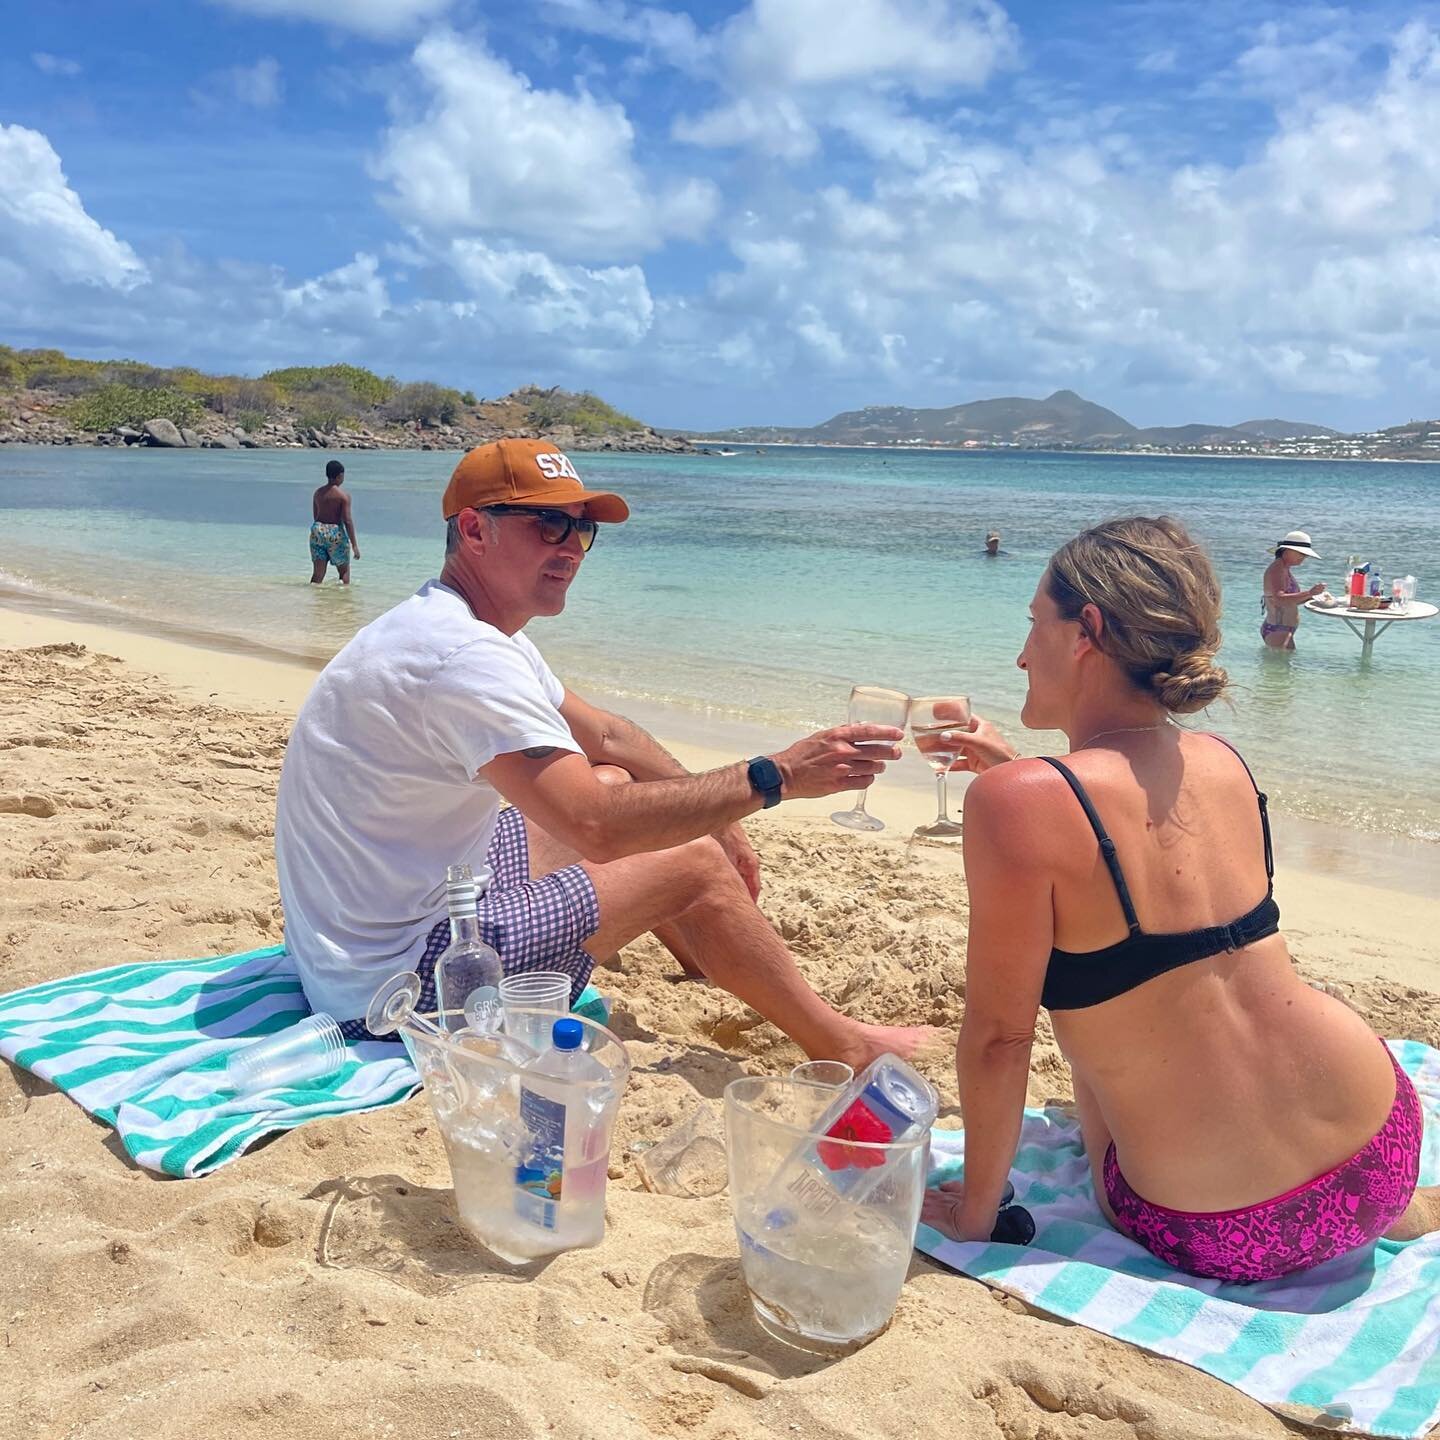 A must try experience in St Martin most people miss and it&rsquo;s so easy to do! 

Pinel Island is located off the northern shore of French Saint Martin. You can get to the island two ways. Take the ferry boat over or rent paddle equipment from @car